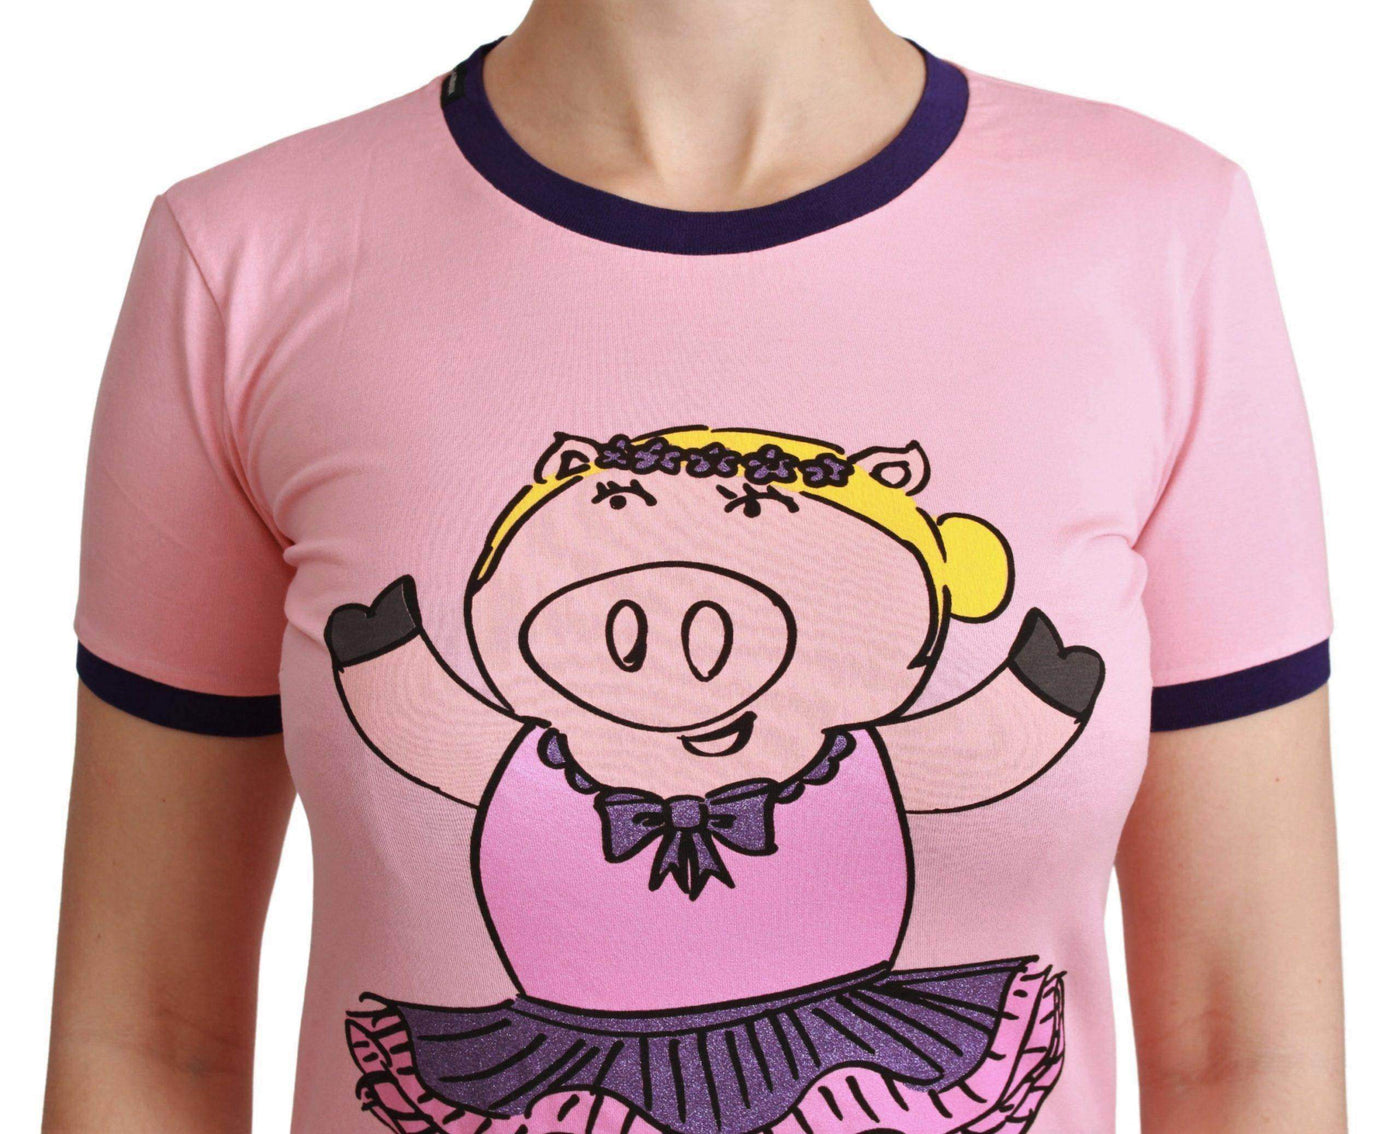 Dolce & Gabbana  Pink YEAR OF THE PIG Top Cotton T-shirt #women, Brand_Dolce & Gabbana, Catch, Dolce & Gabbana, feed-agegroup-adult, feed-color-pink, feed-gender-female, feed-size-IT36 | XS, feed-size-IT38|XS, feed-size-IT40|S, feed-size-IT42|M, feed-size-IT44|L, feed-size-IT46|XL, Gender_Women, IT36 | XS, IT38|XS, IT40|S, IT42|M, IT44|L, IT46|XL, Kogan, Pink, Tops & T-Shirts - Women - Clothing, Women - New Arrivals at SEYMAYKA